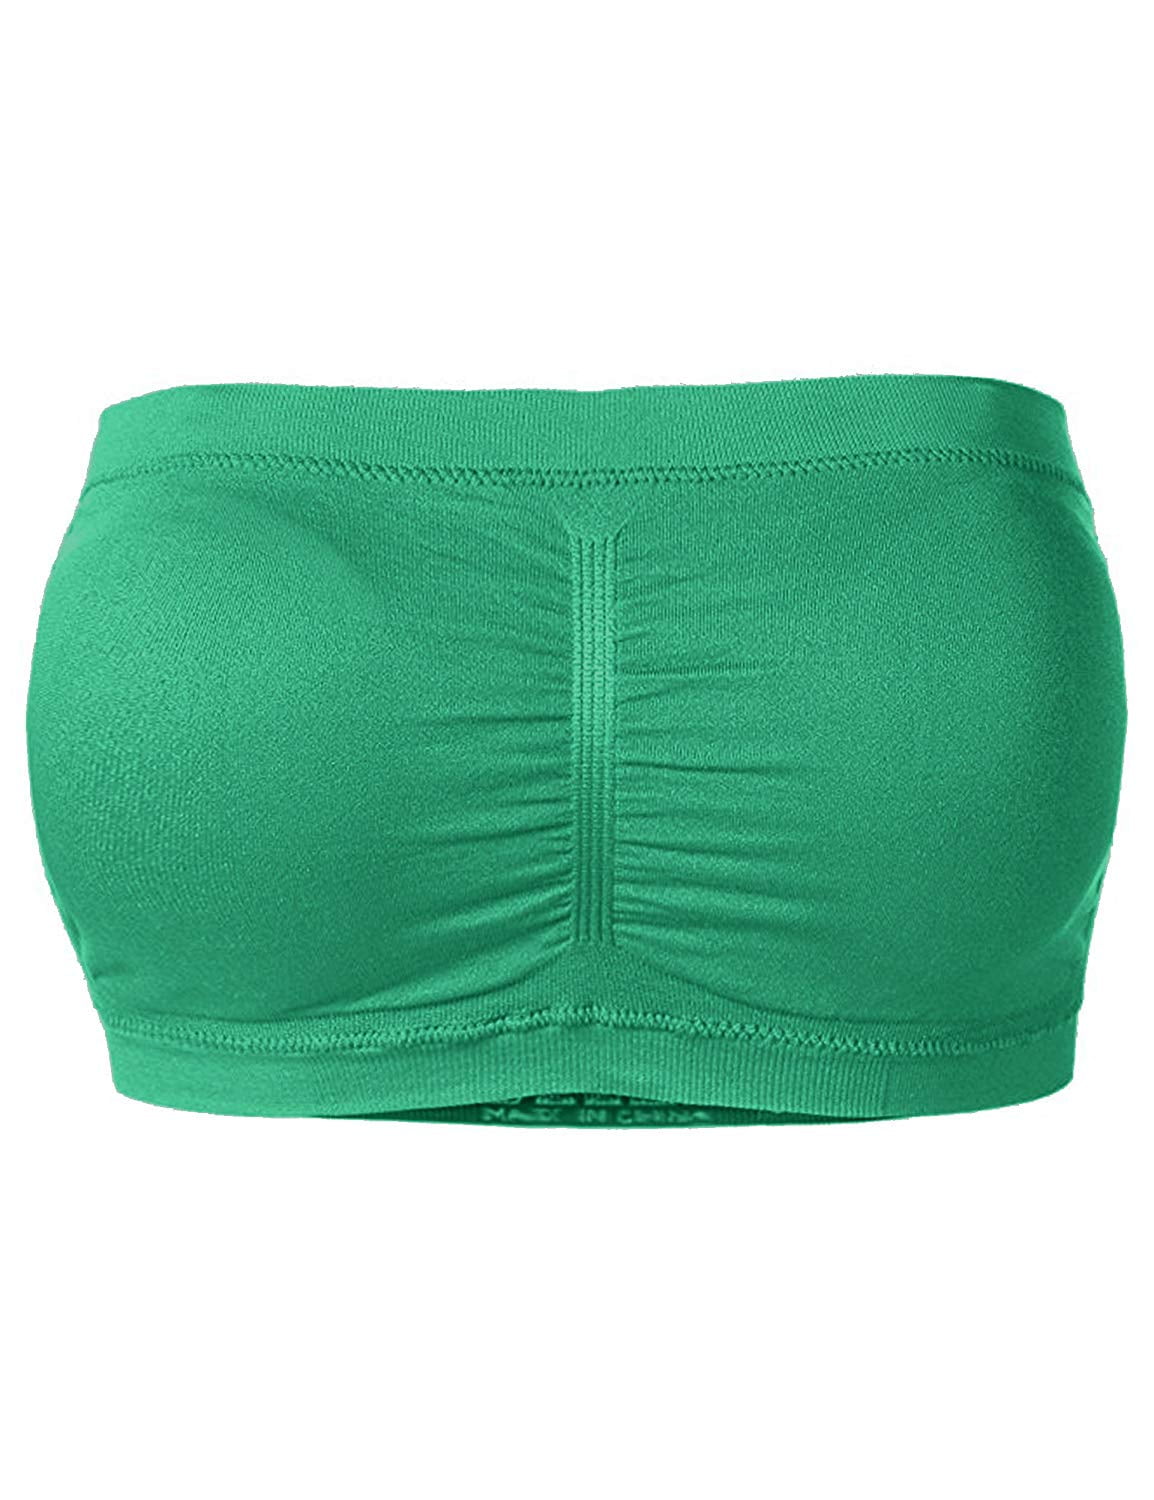 Details about   CGTL Womens Strapless Bandeau Bra Padded Wireless Stretchy Tube Top Home Sport E